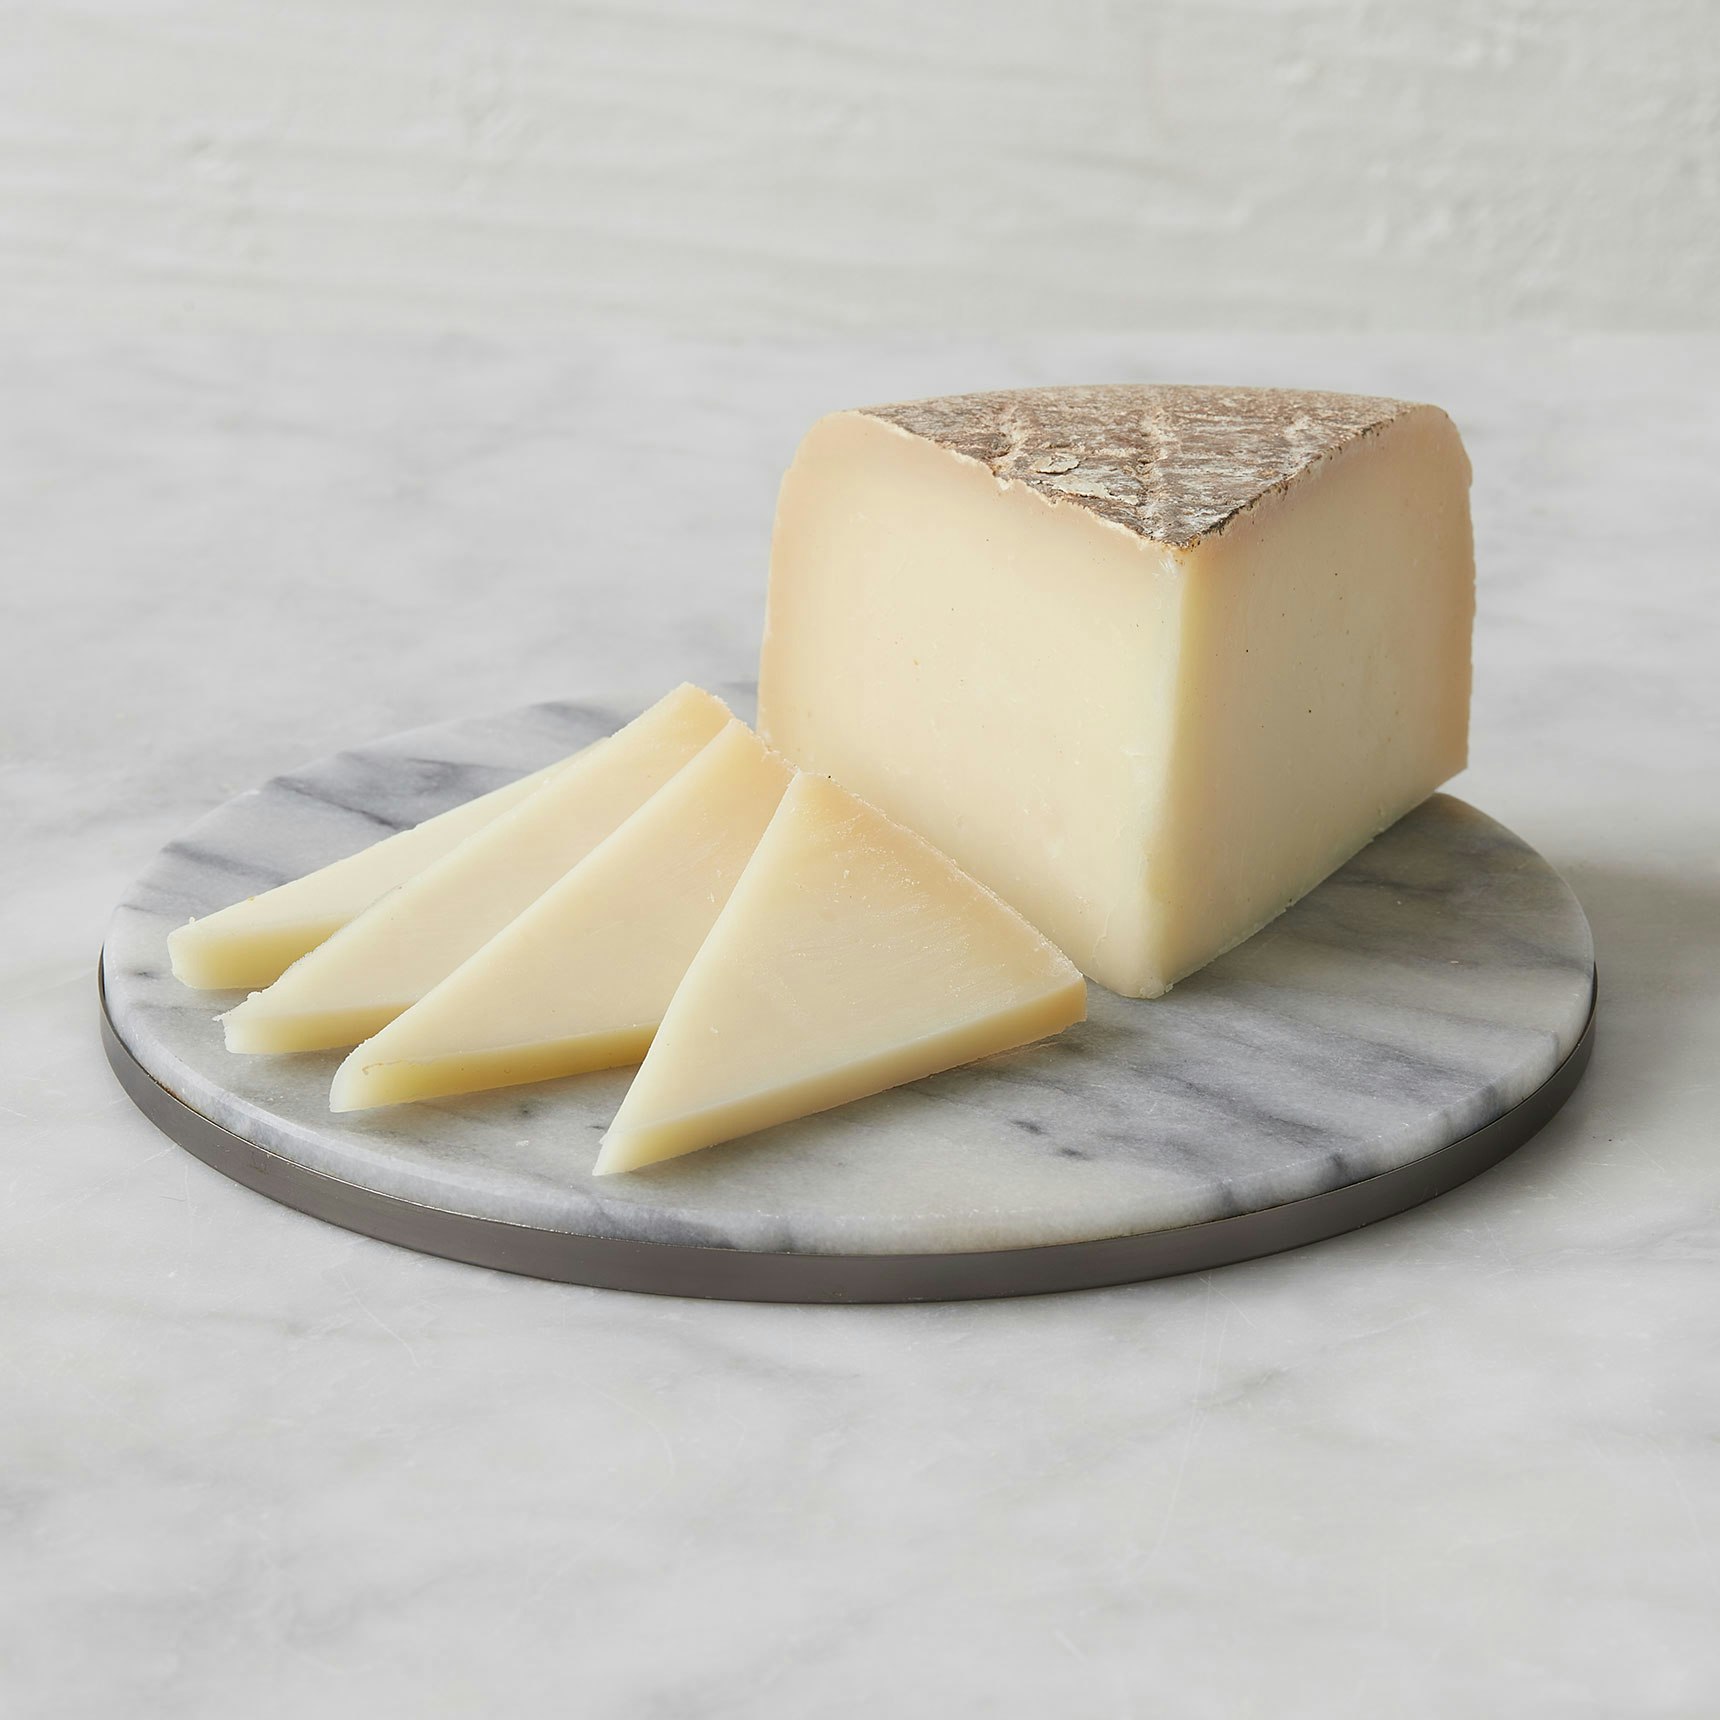 murrays cave aged reserve mistoa cheese